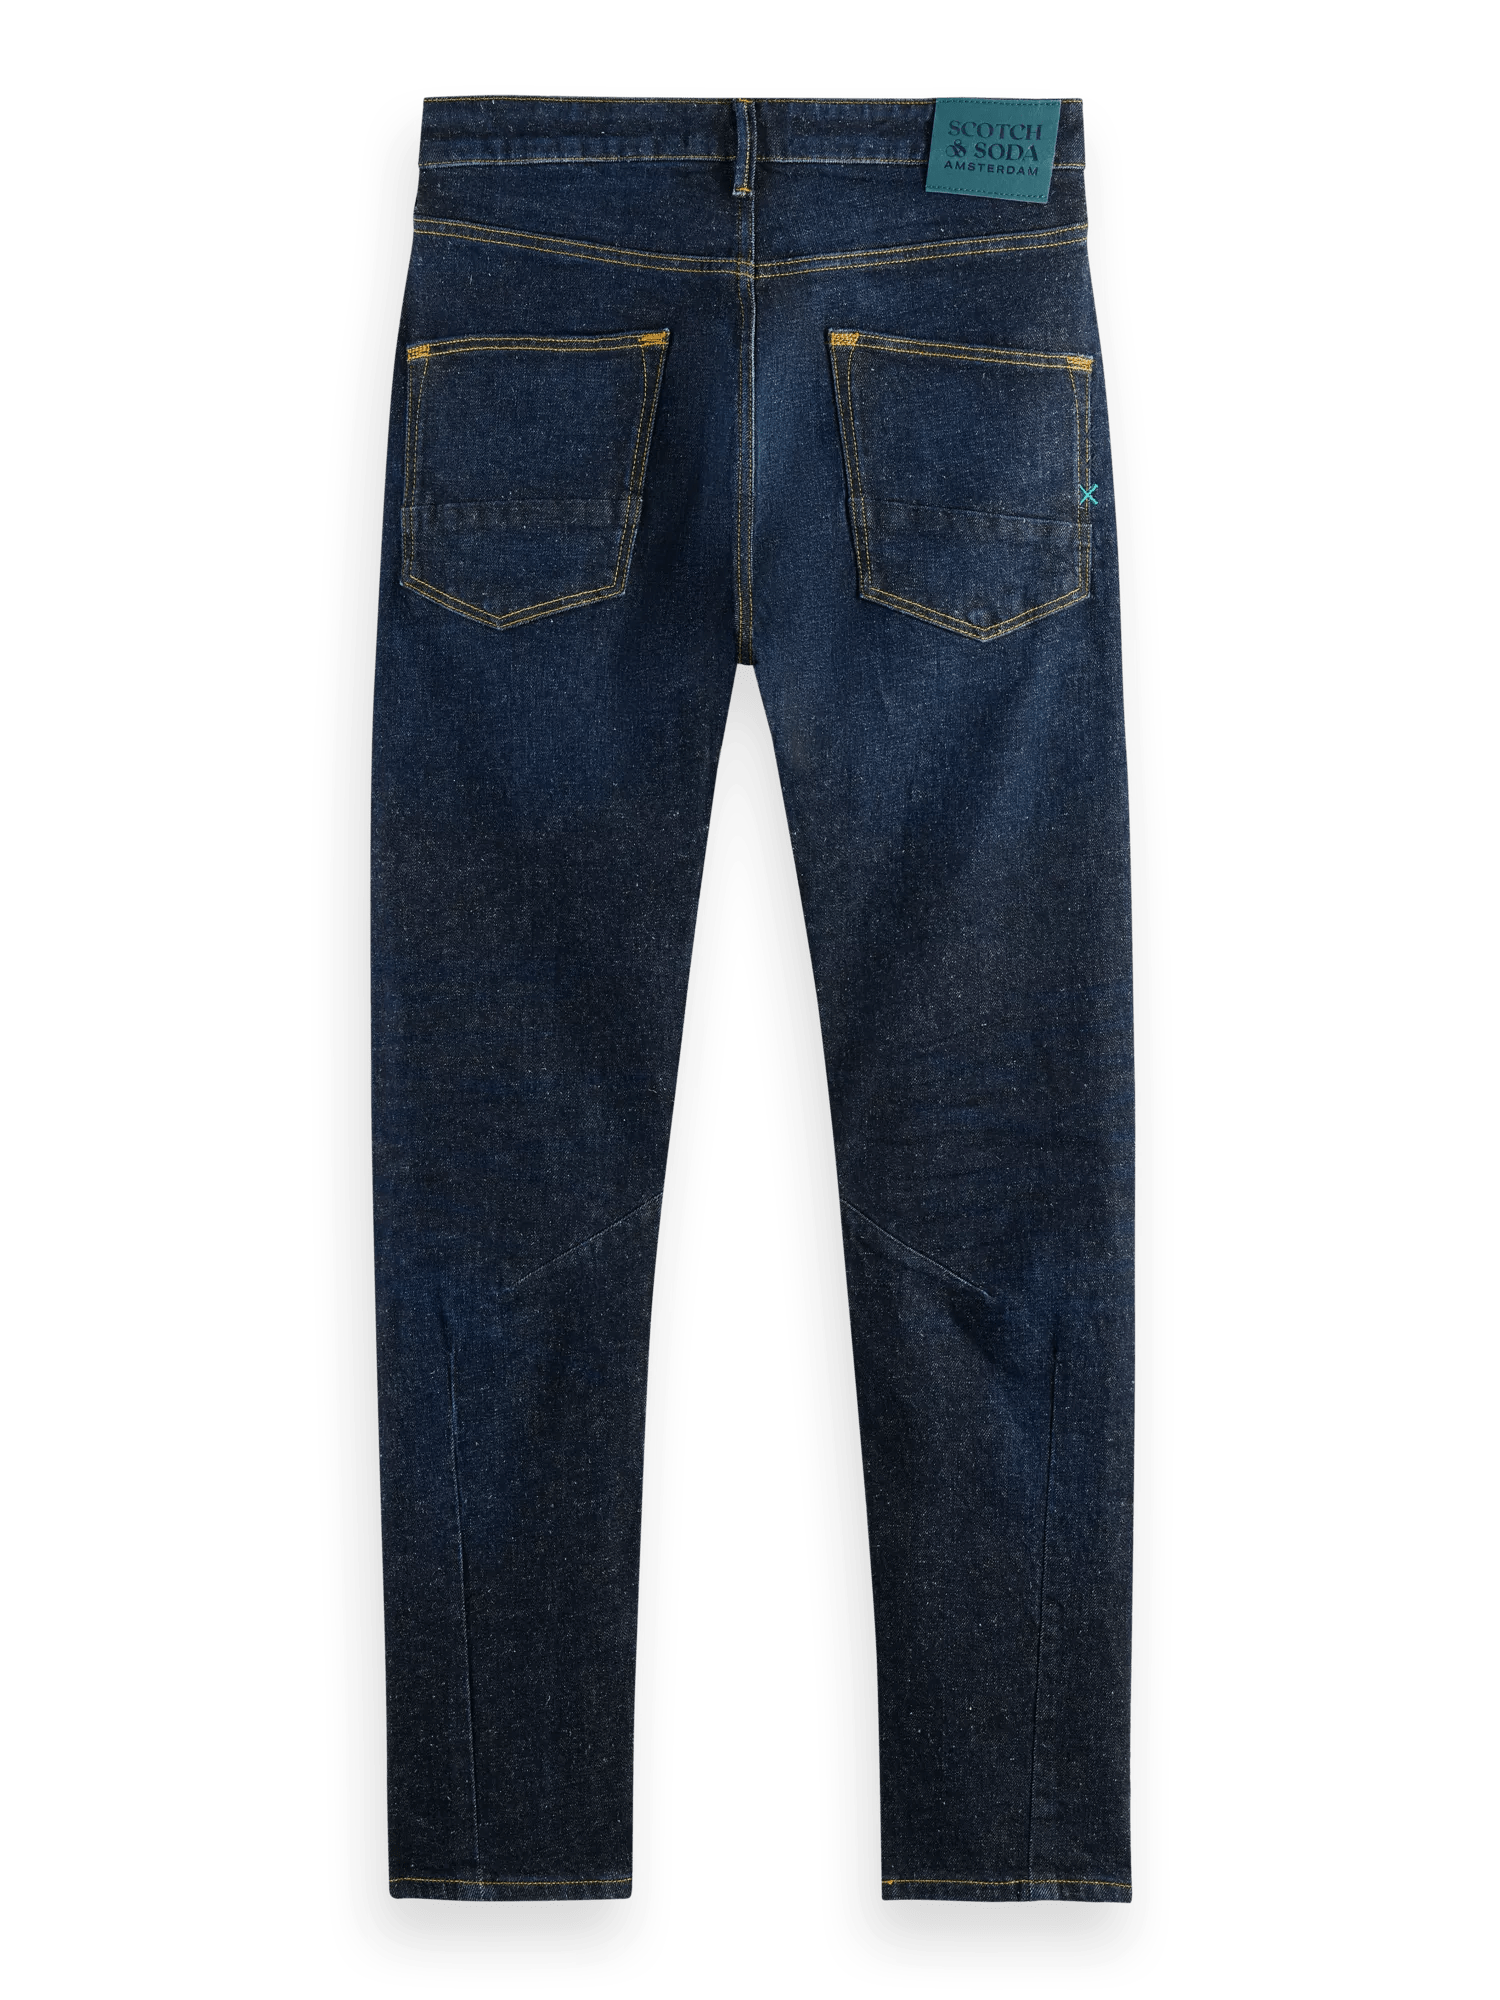 The Singel Slim Tapered Fit Jeans